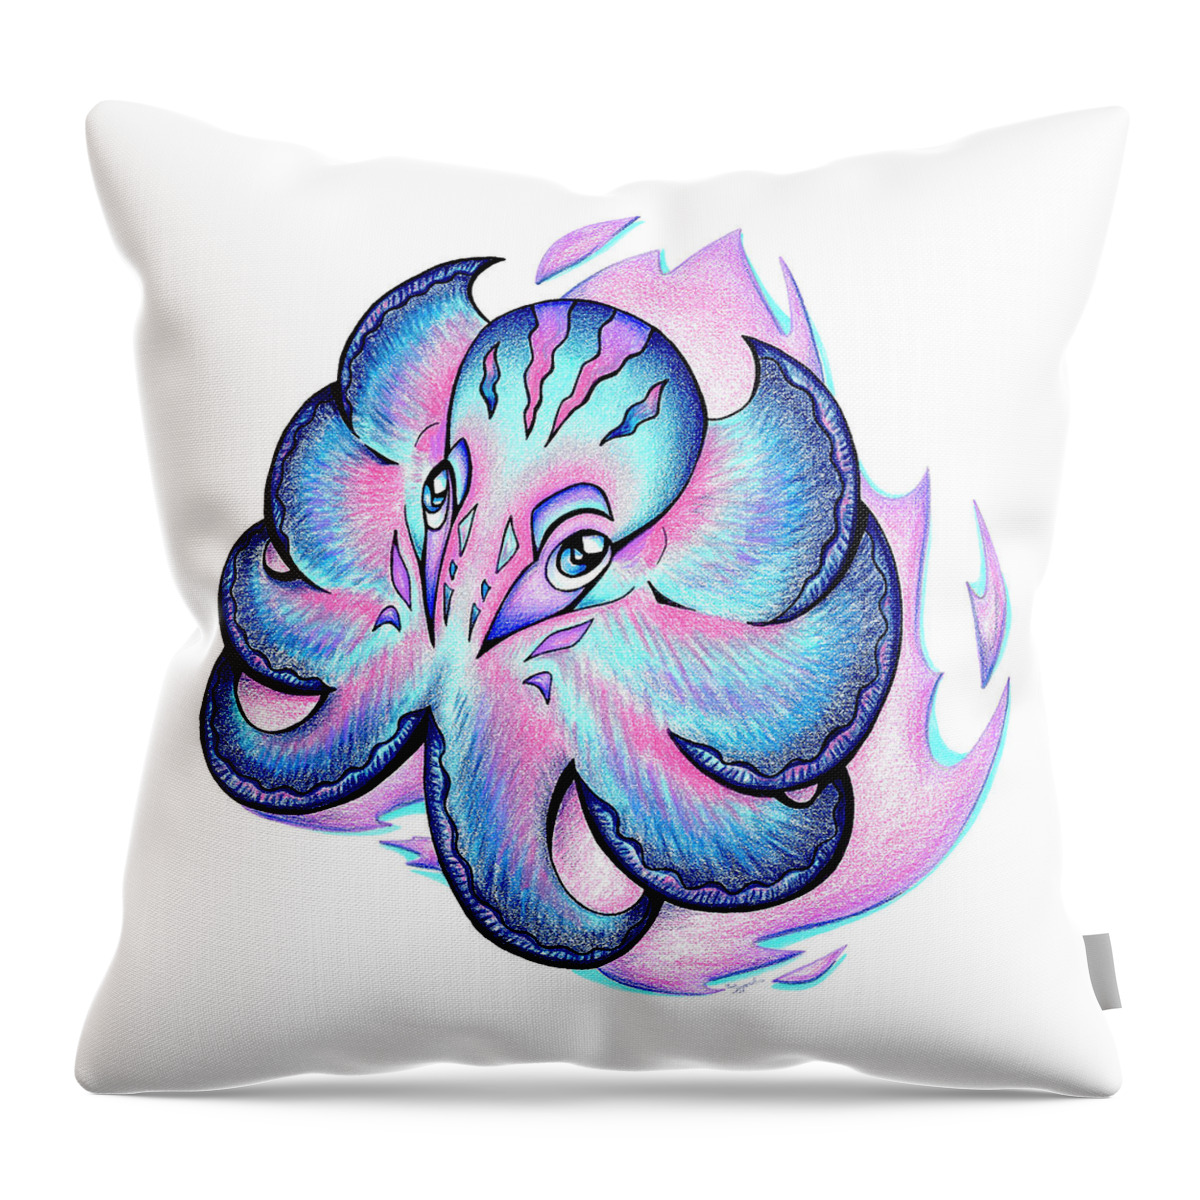 Octopus Throw Pillow featuring the drawing Octopus I by Sipporah Art and Illustration